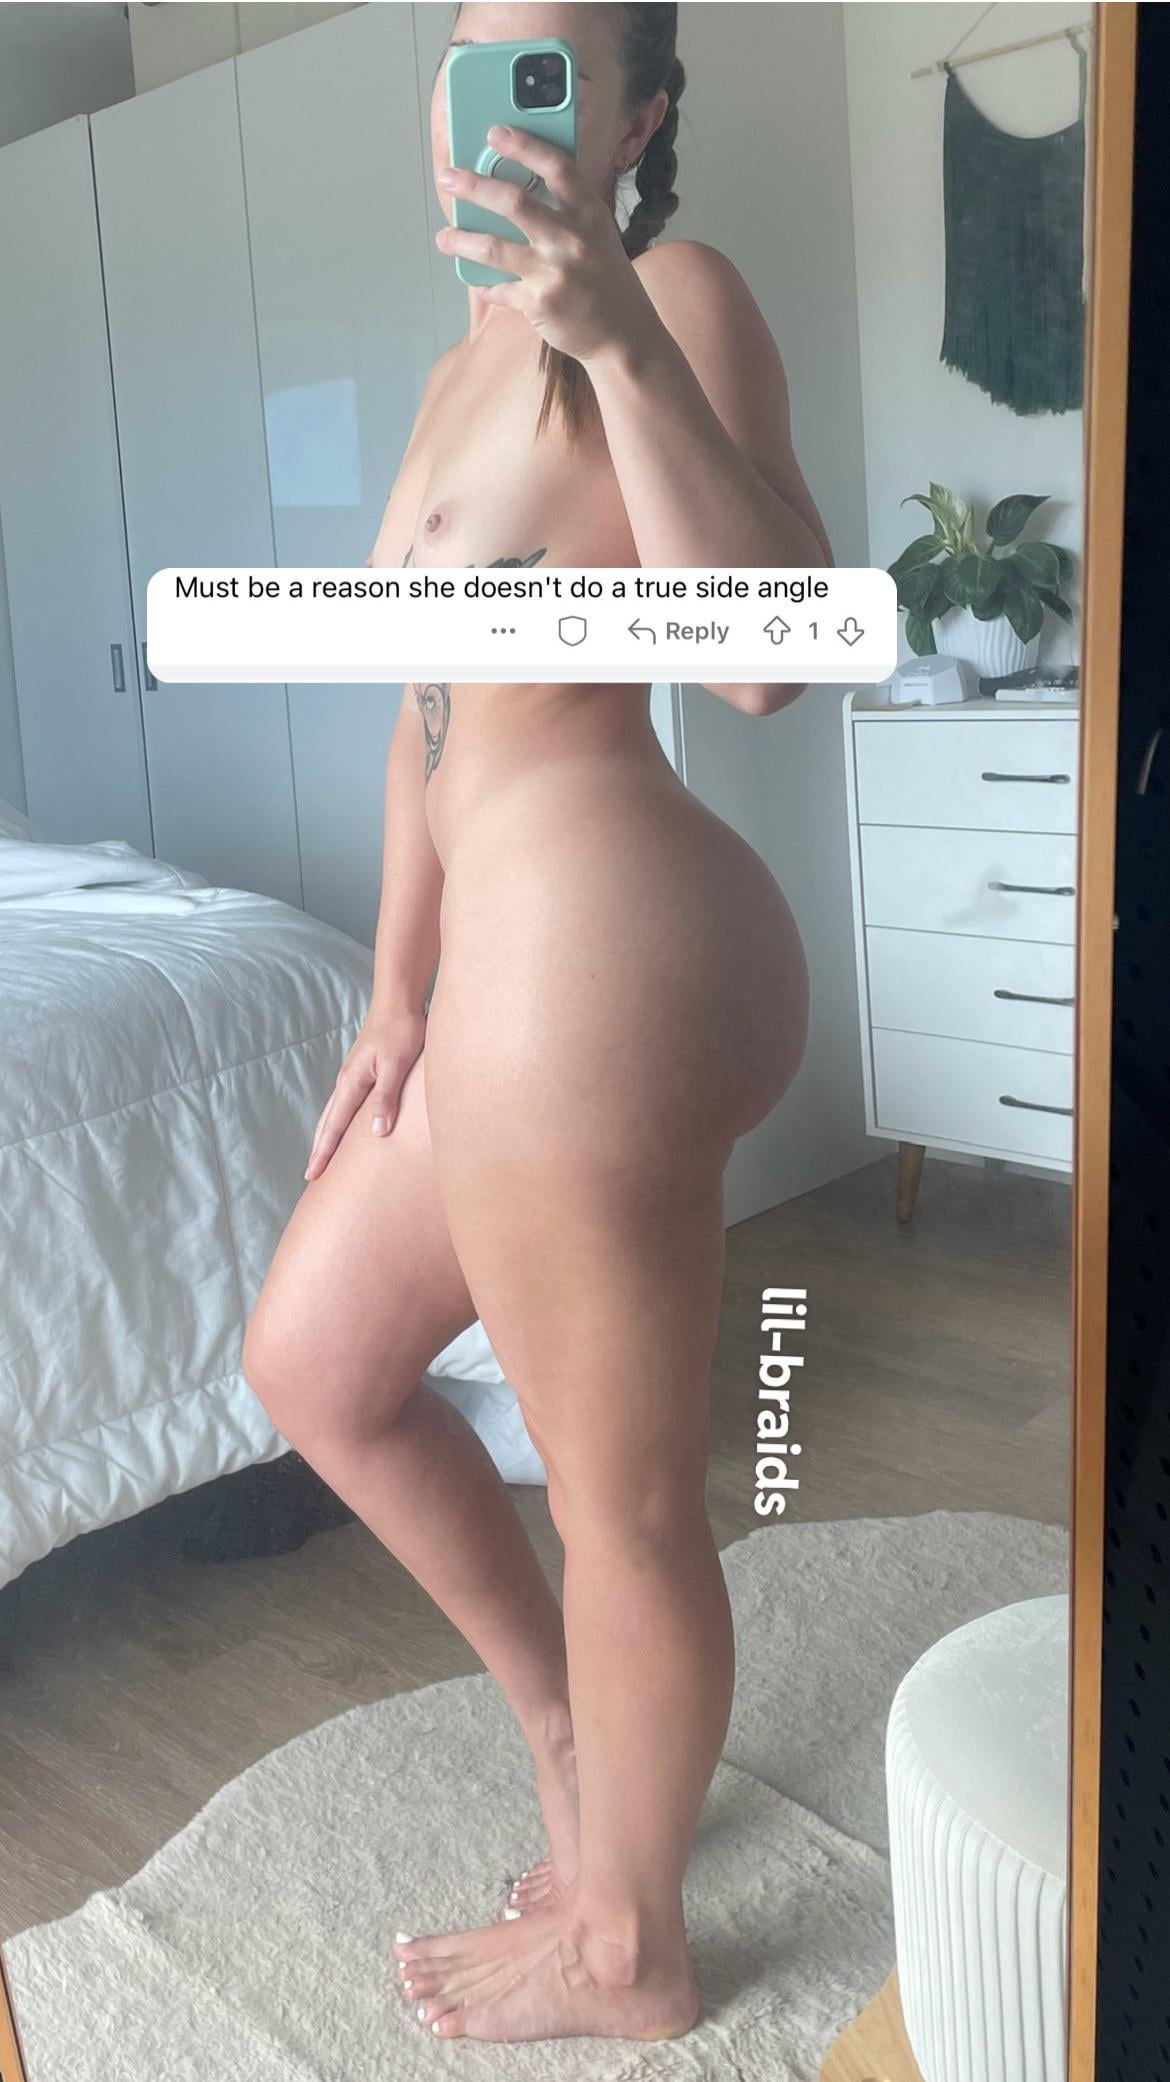 PAWG Must be a reason she didnt do a true